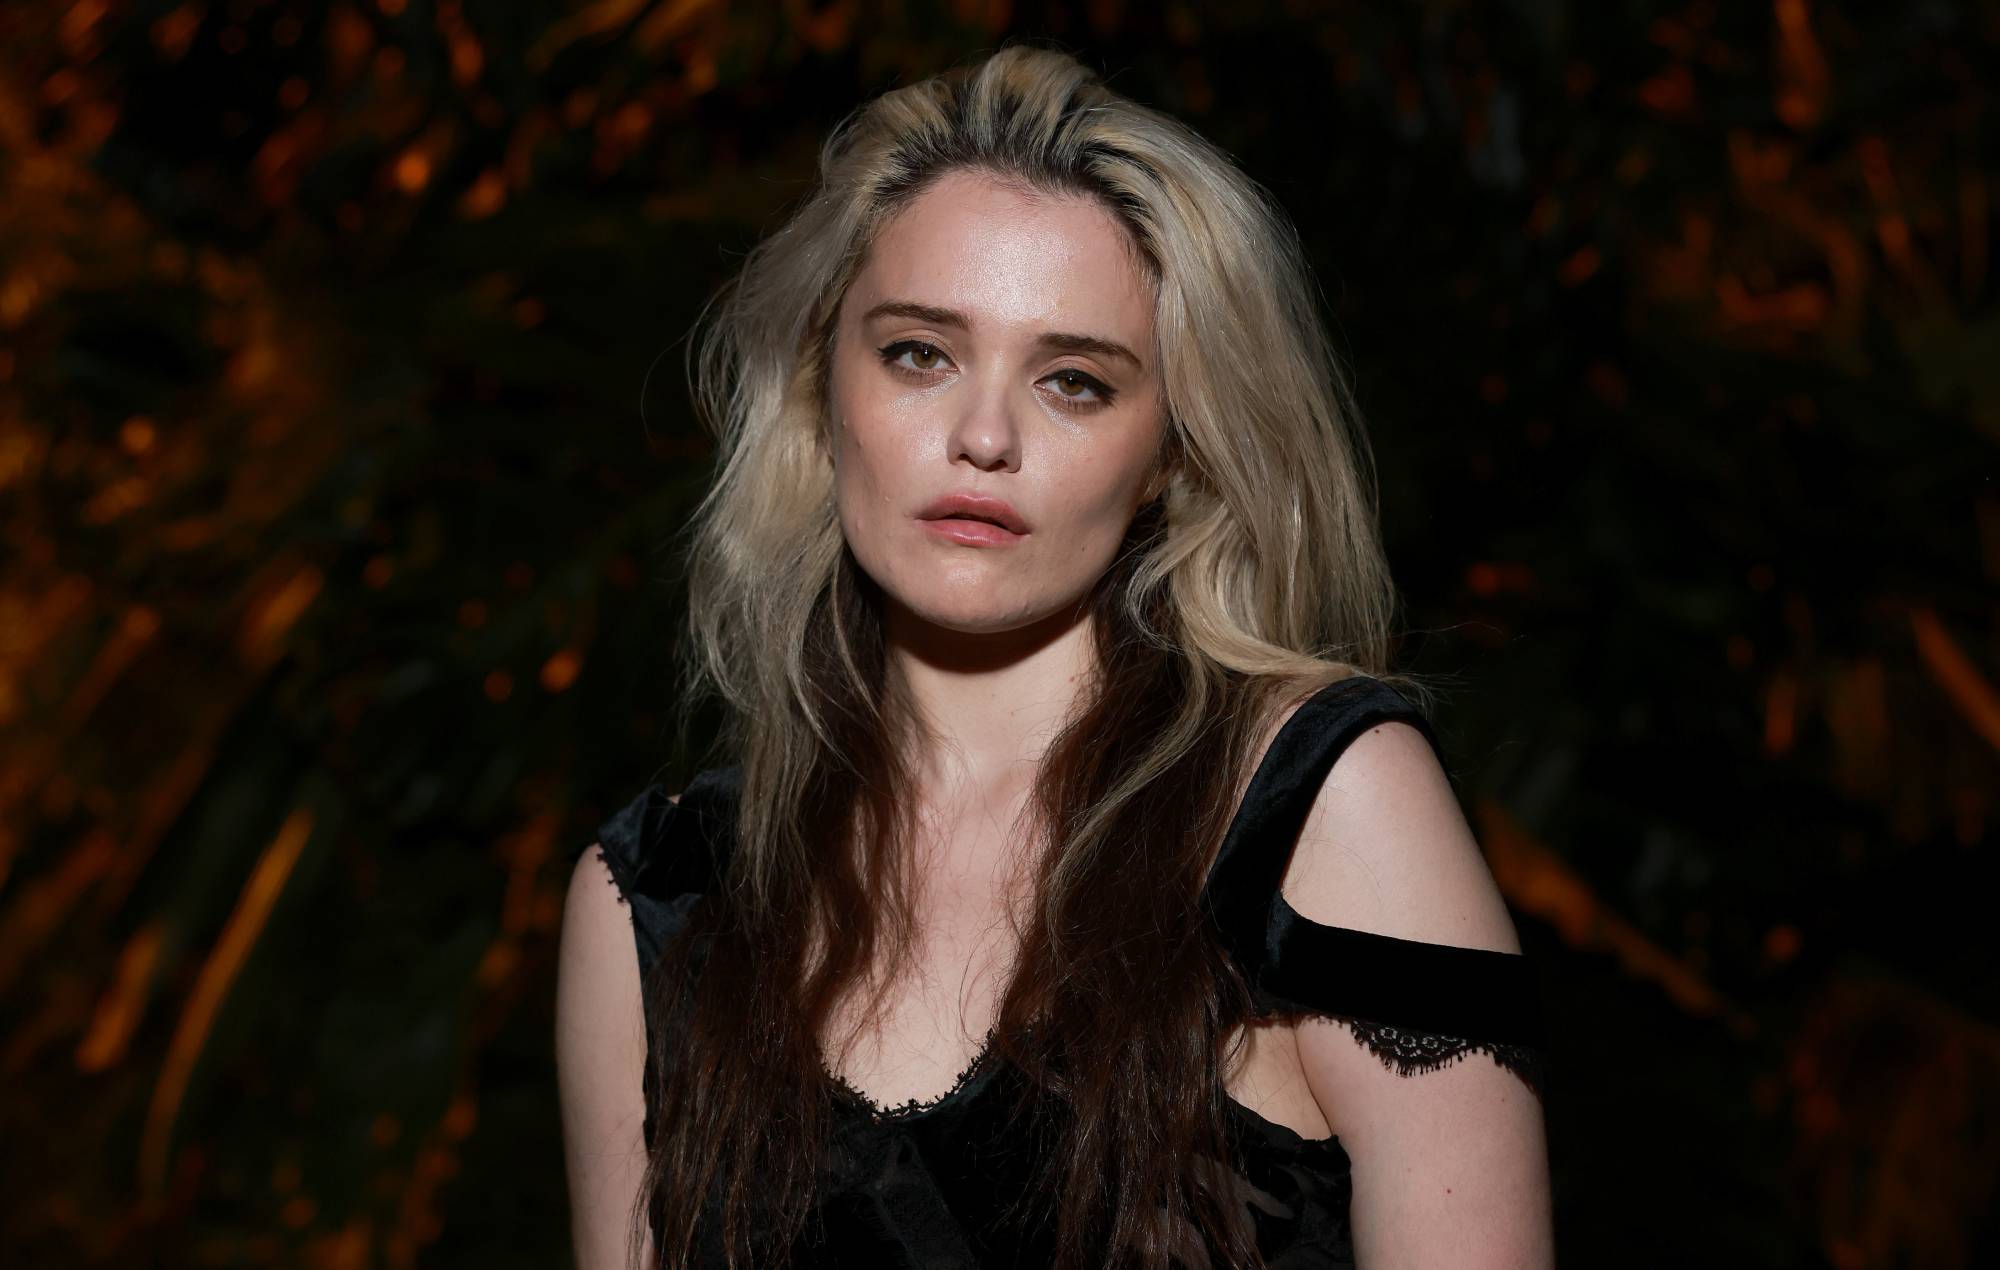 Sky Ferreira removed from Capitol Records’ website